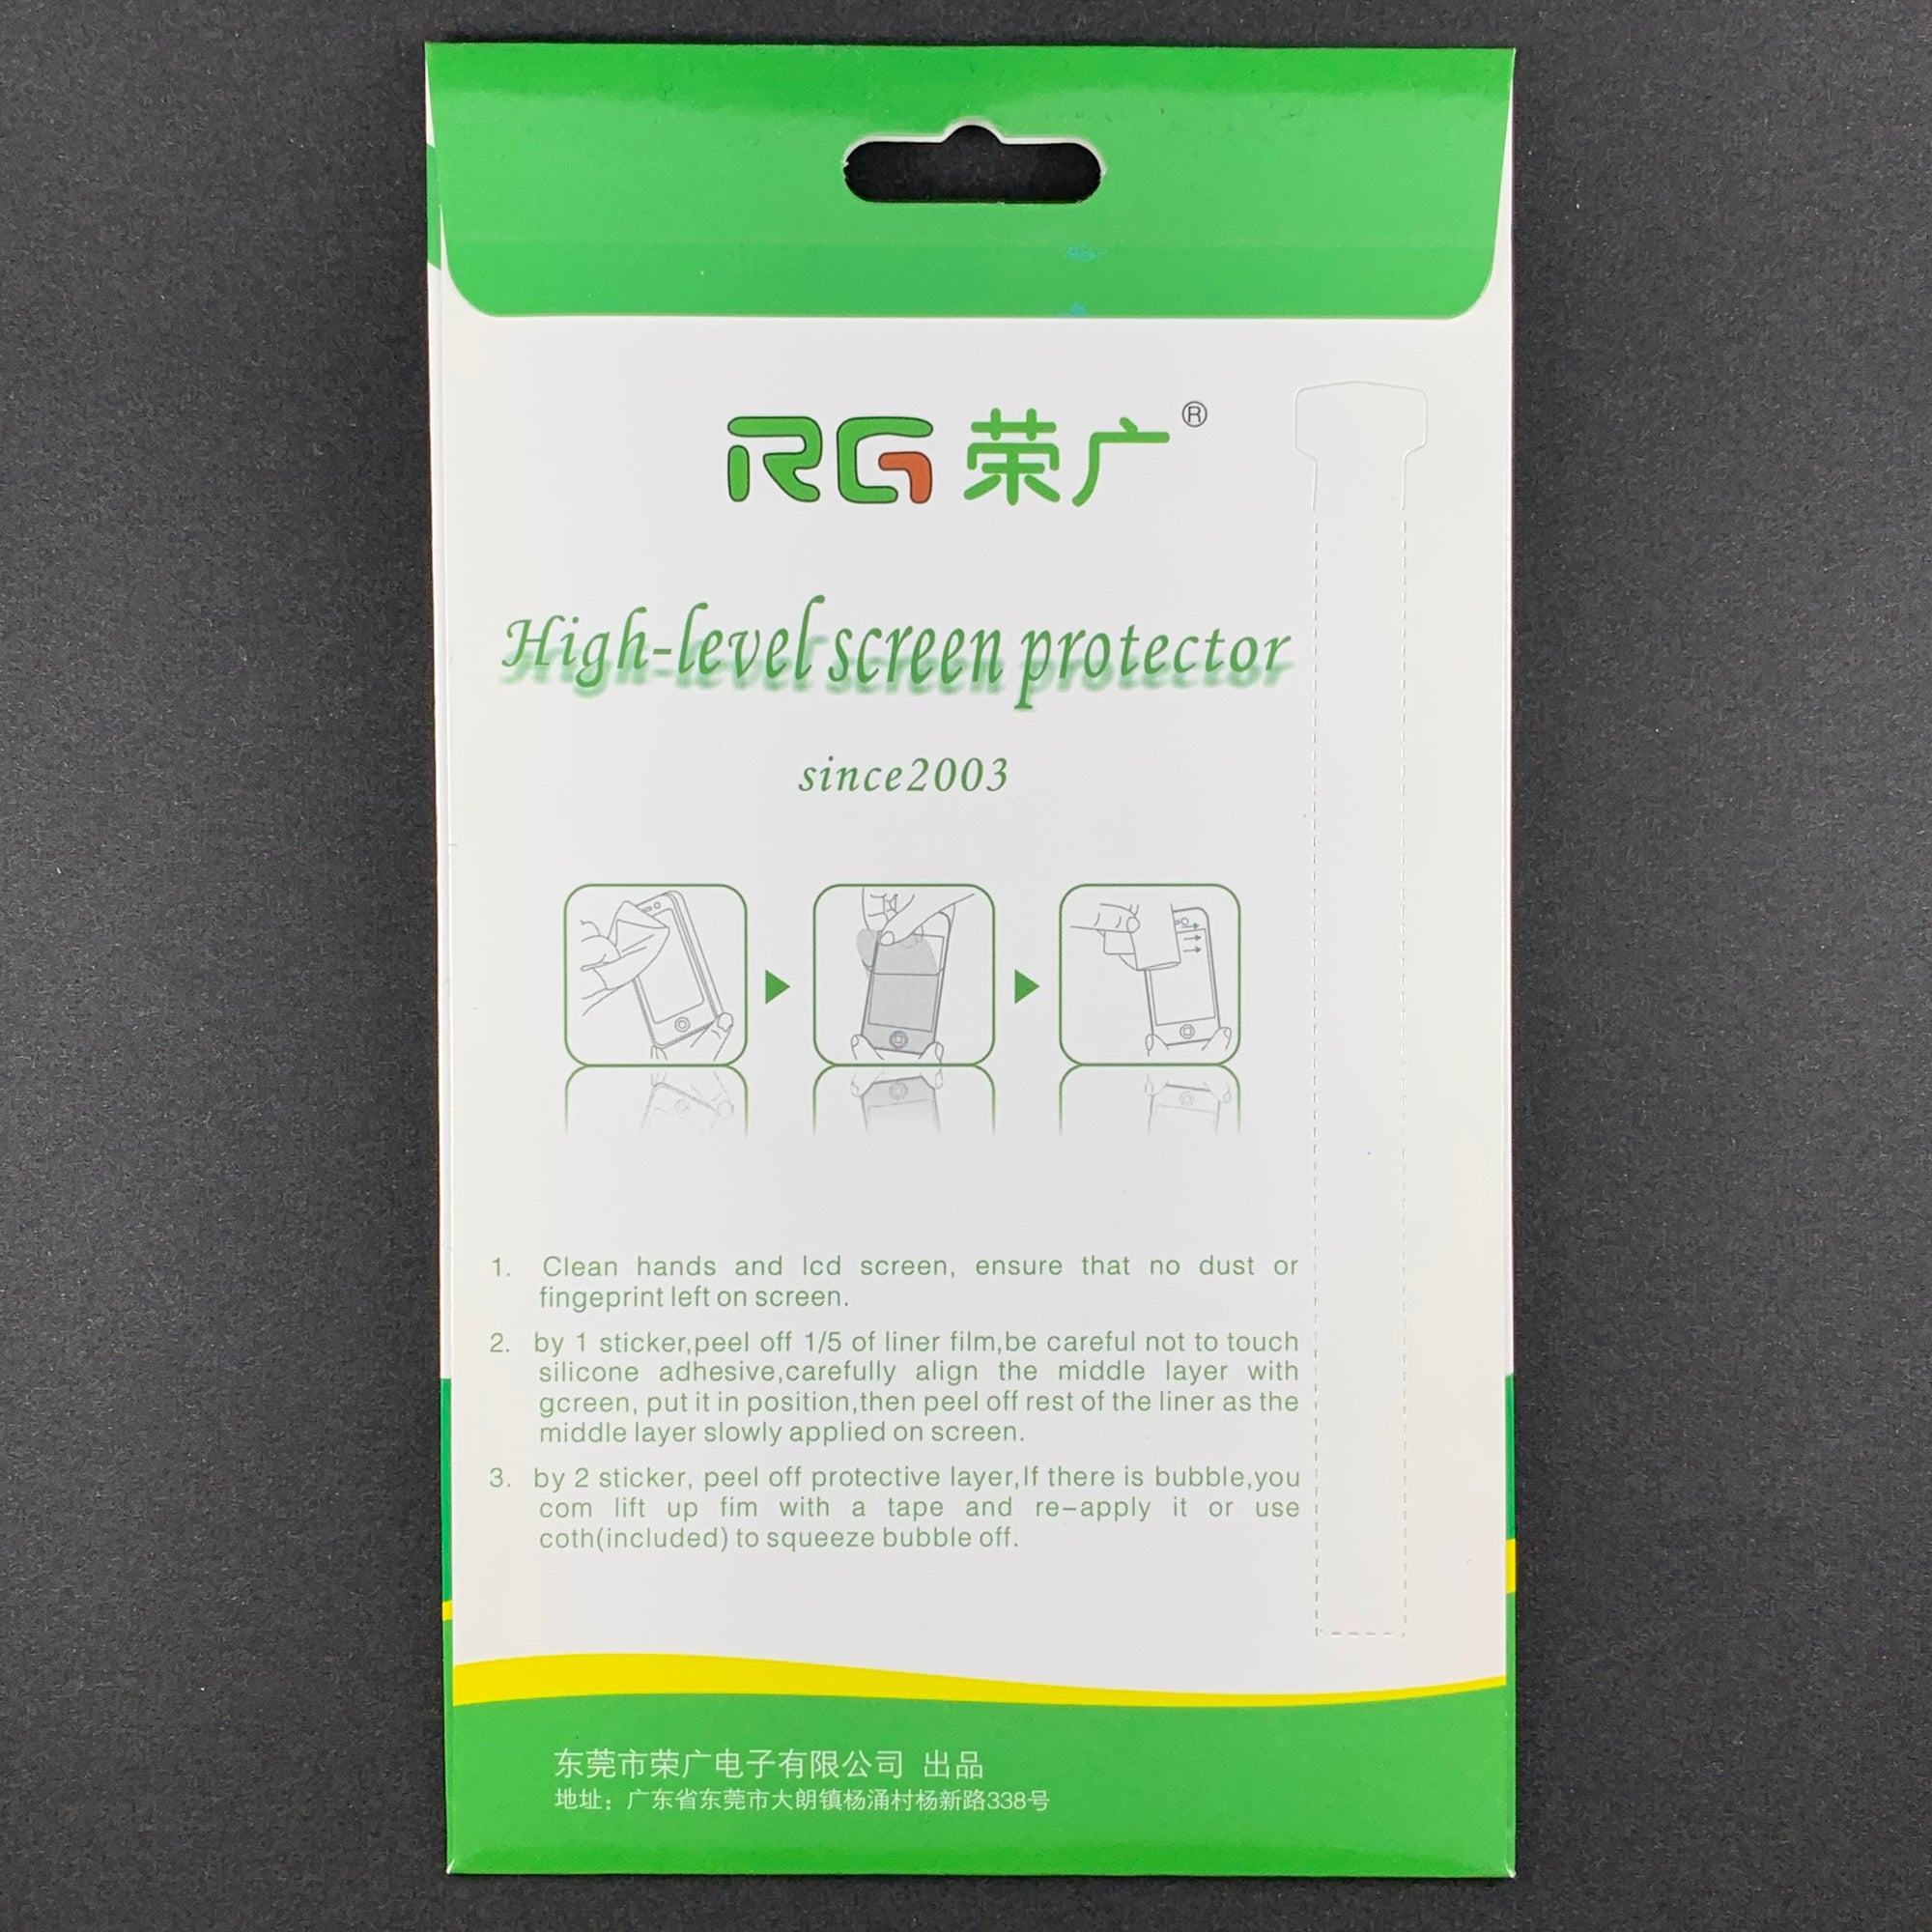 RG Professional Soft Film Screen Protector for iPad Pro 10.5" / Air 3 (CLEAR, 2-PACK)